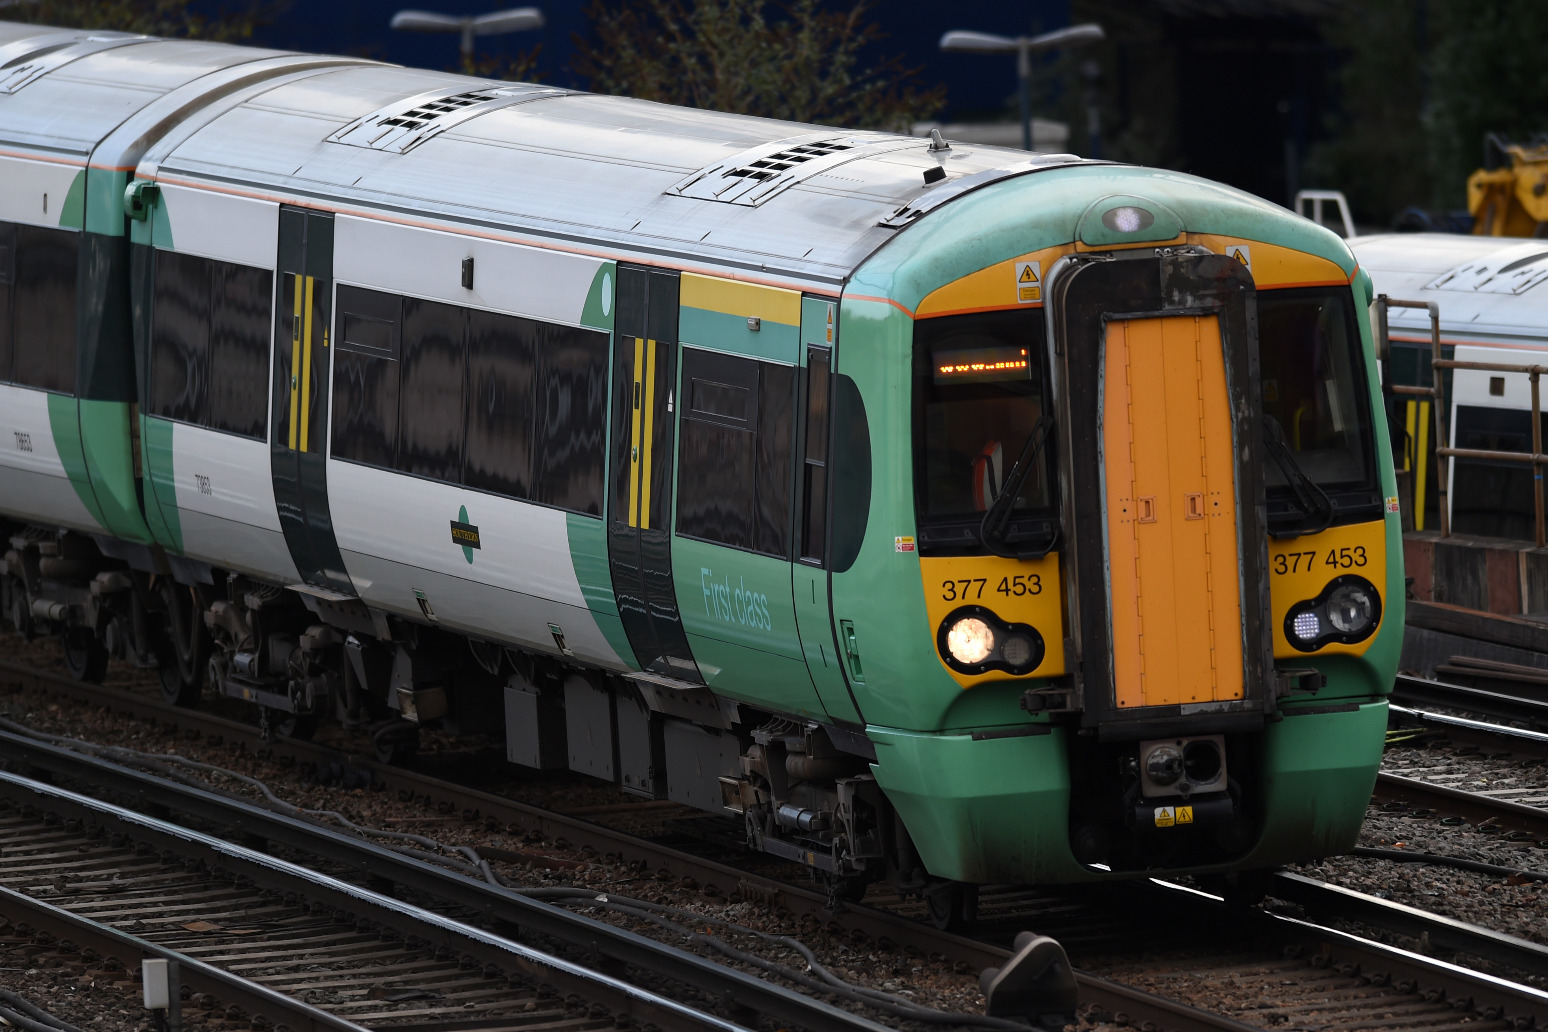 RMT union suspends all strike action for Network Rail workers 